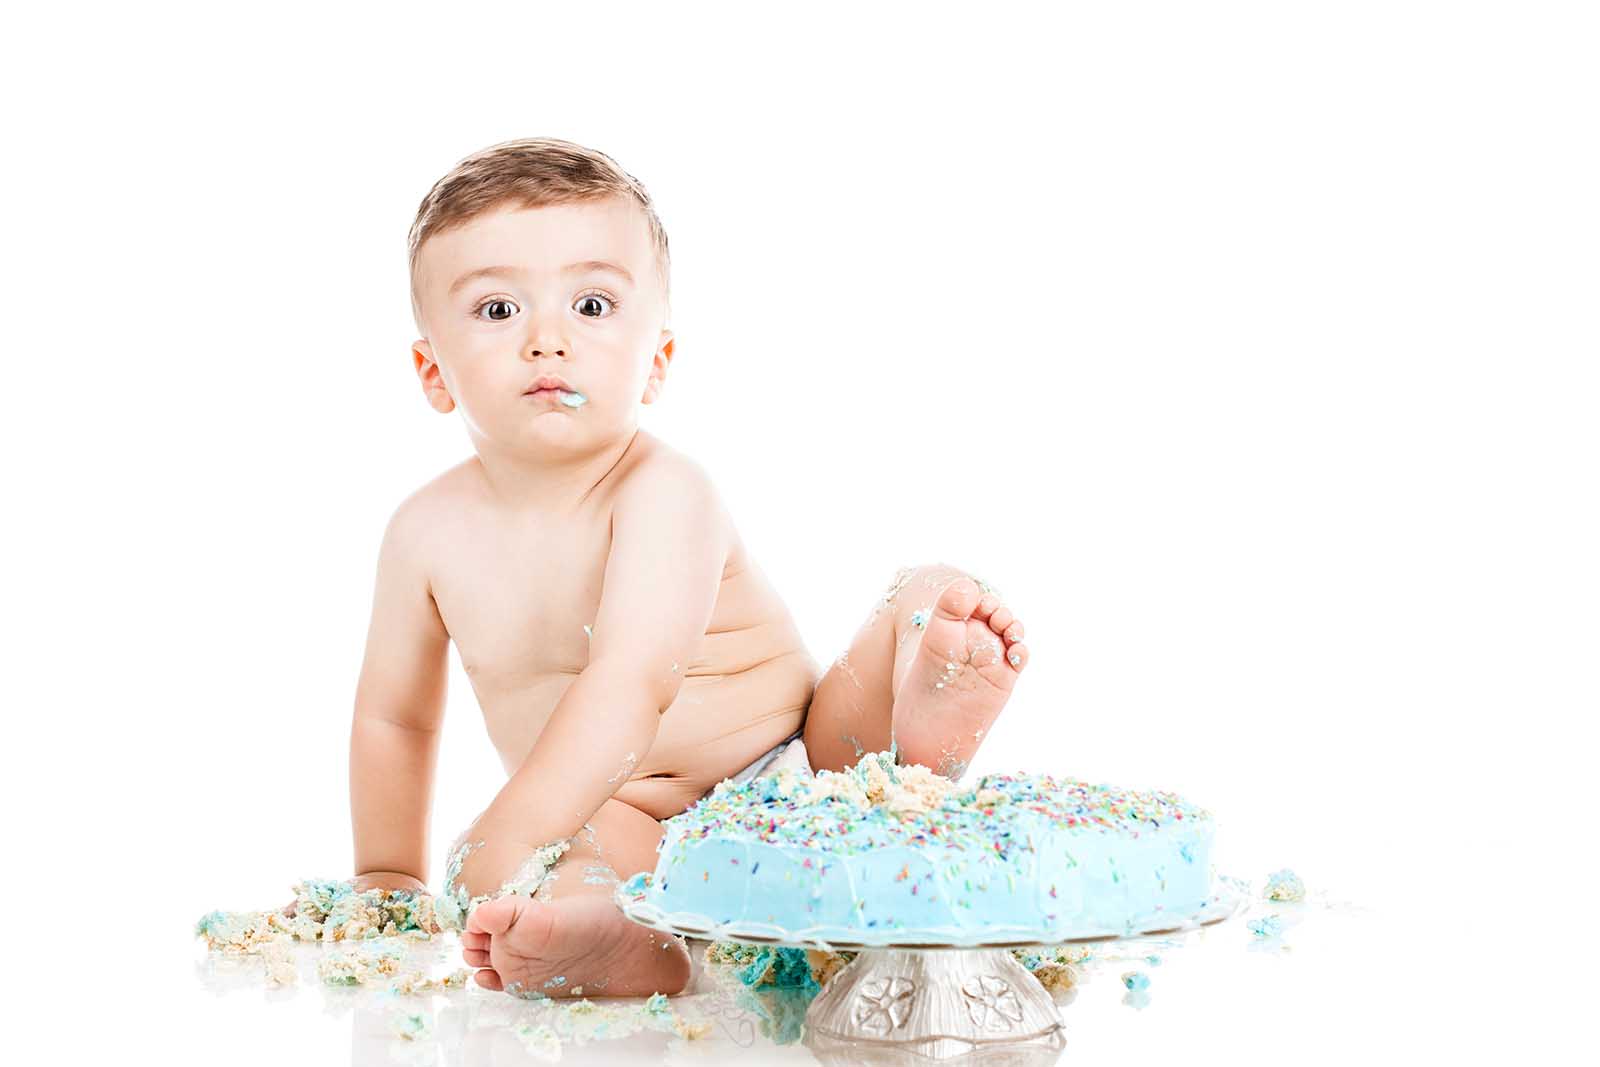 Today's Trends in baby photography - Baby birthday boy with a smashed cake